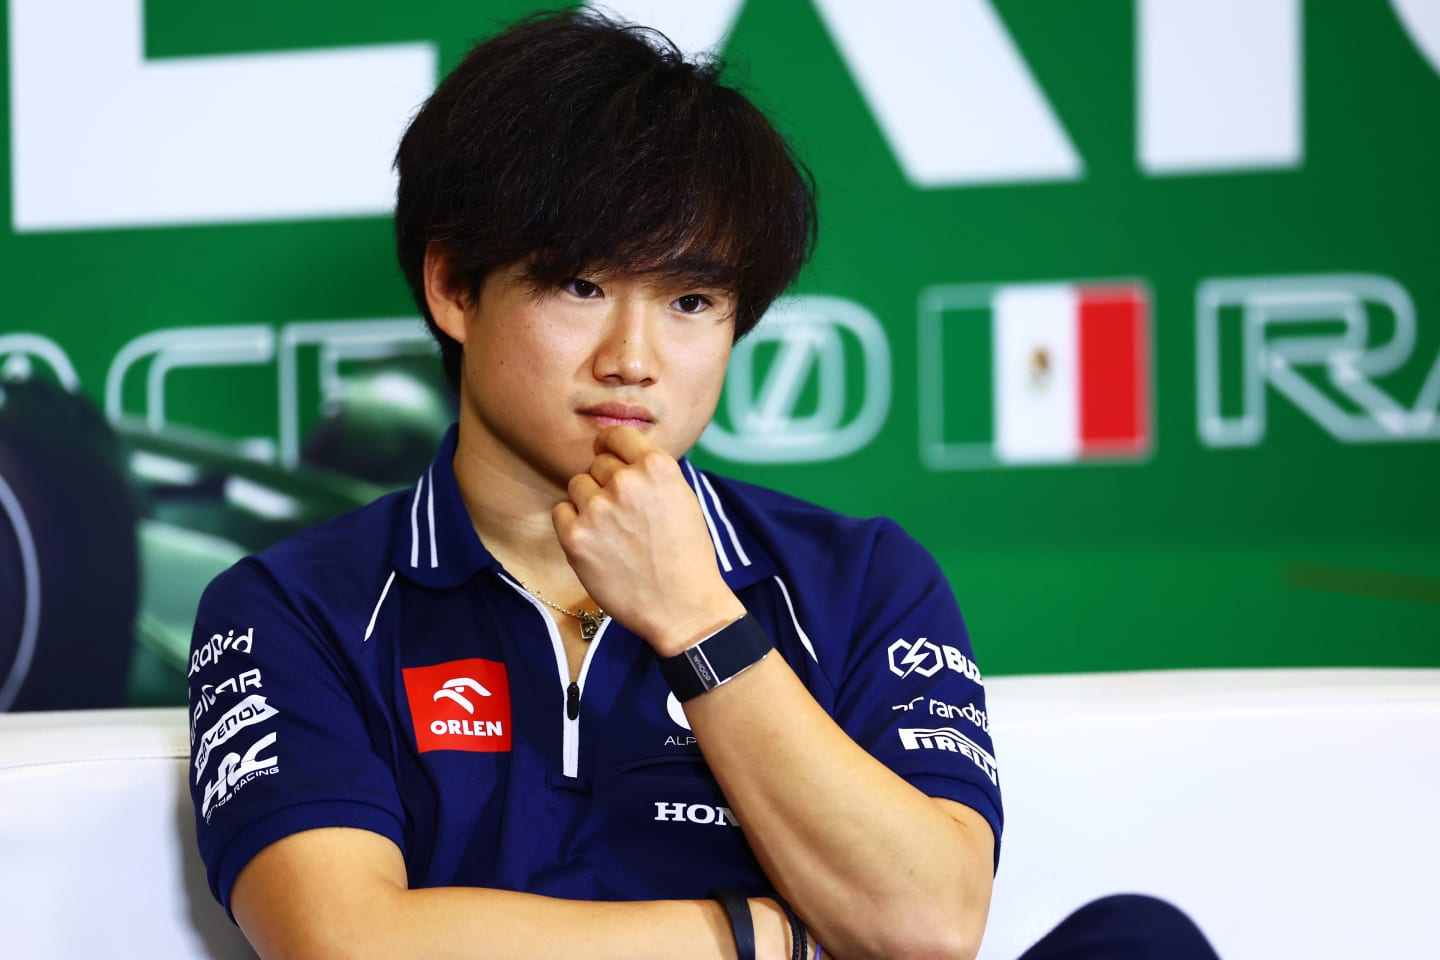 MEXICO CITY, MEXICO - OCTOBER 26: Yuki Tsunoda of Japan and Scuderia AlphaTauri attends the Drivers Press Conference during previews ahead of the F1 Grand Prix of Mexico at Autodromo Hermanos Rodriguez on October 26, 2023 in Mexico City, Mexico. (Photo by Dan Istitene/Getty Images)